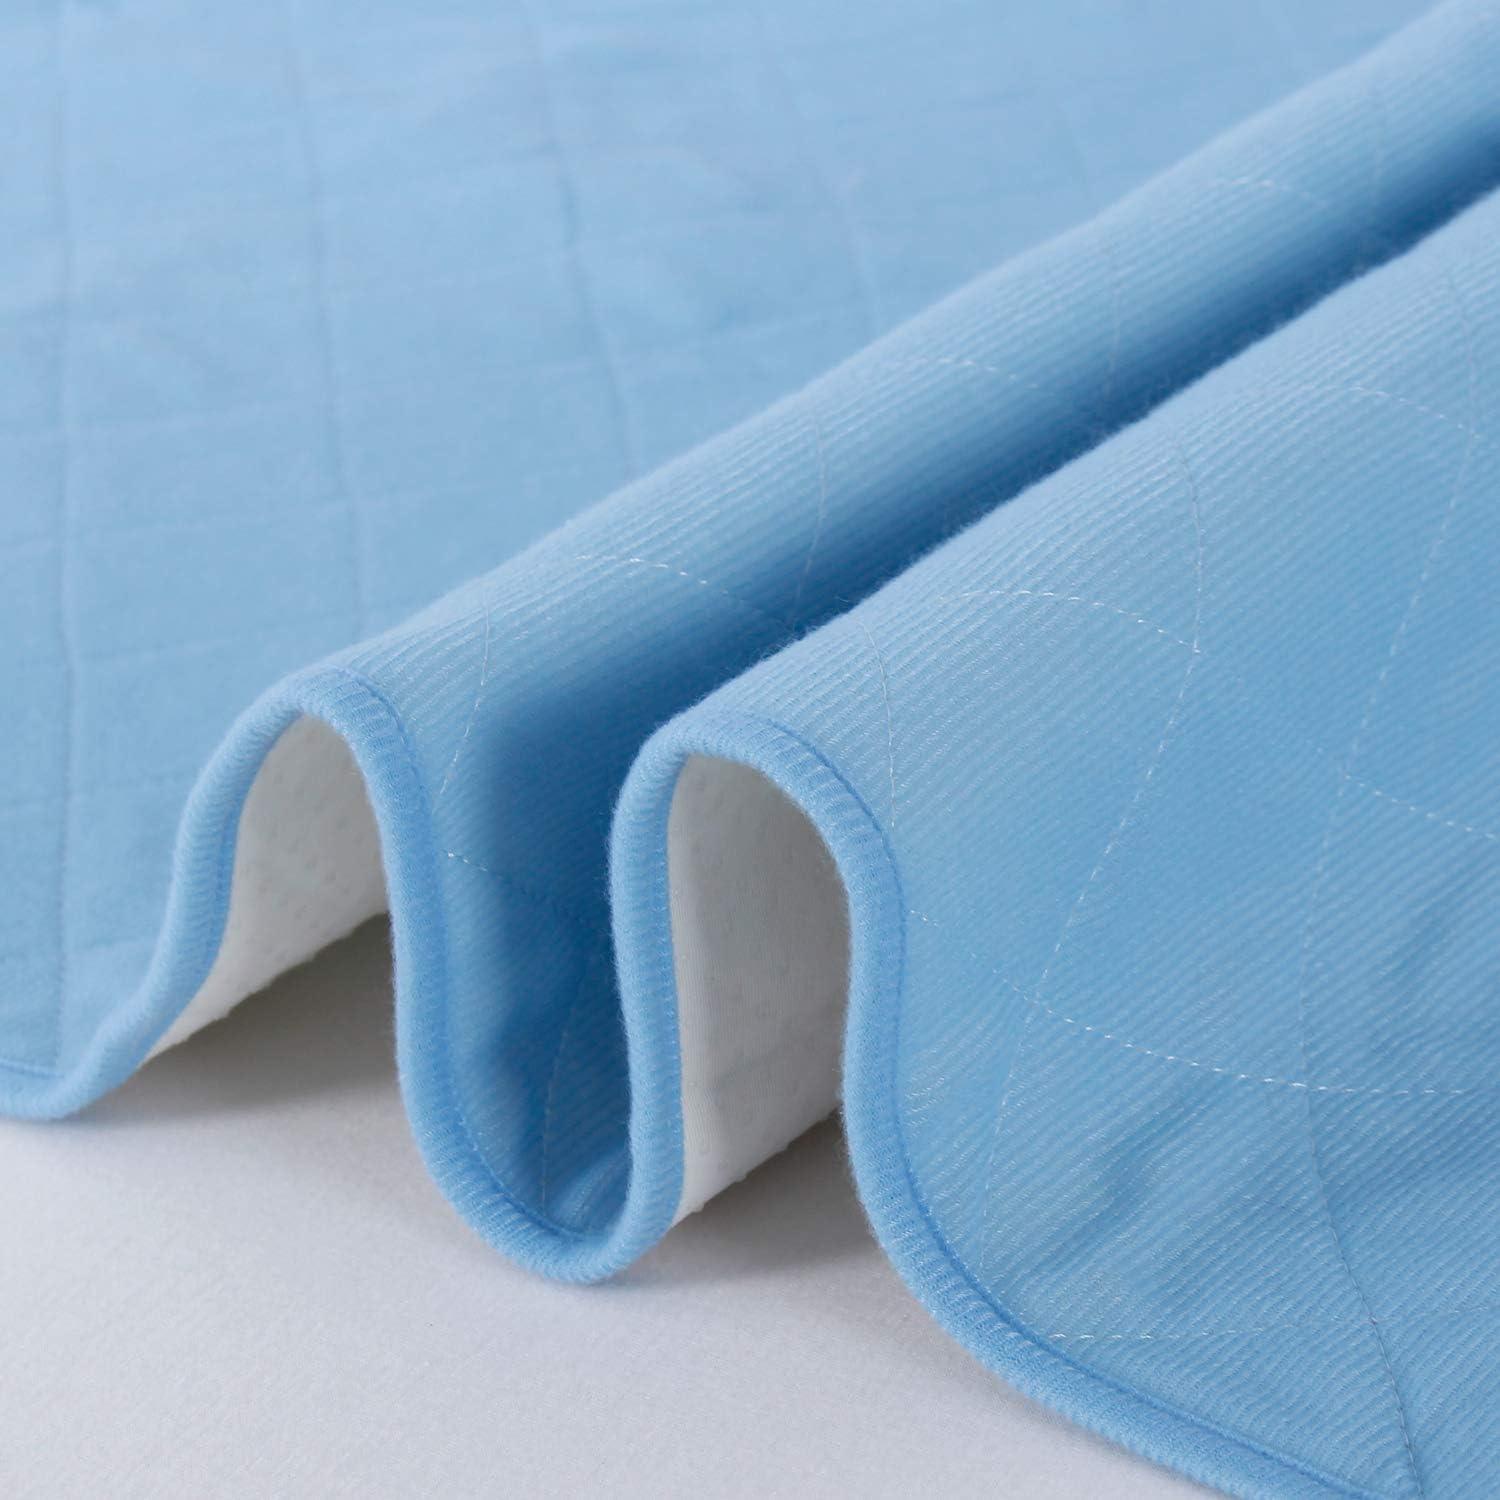 Washable Bed Pads for Incontinence 2 Pack,34'' x 52'', Reusable